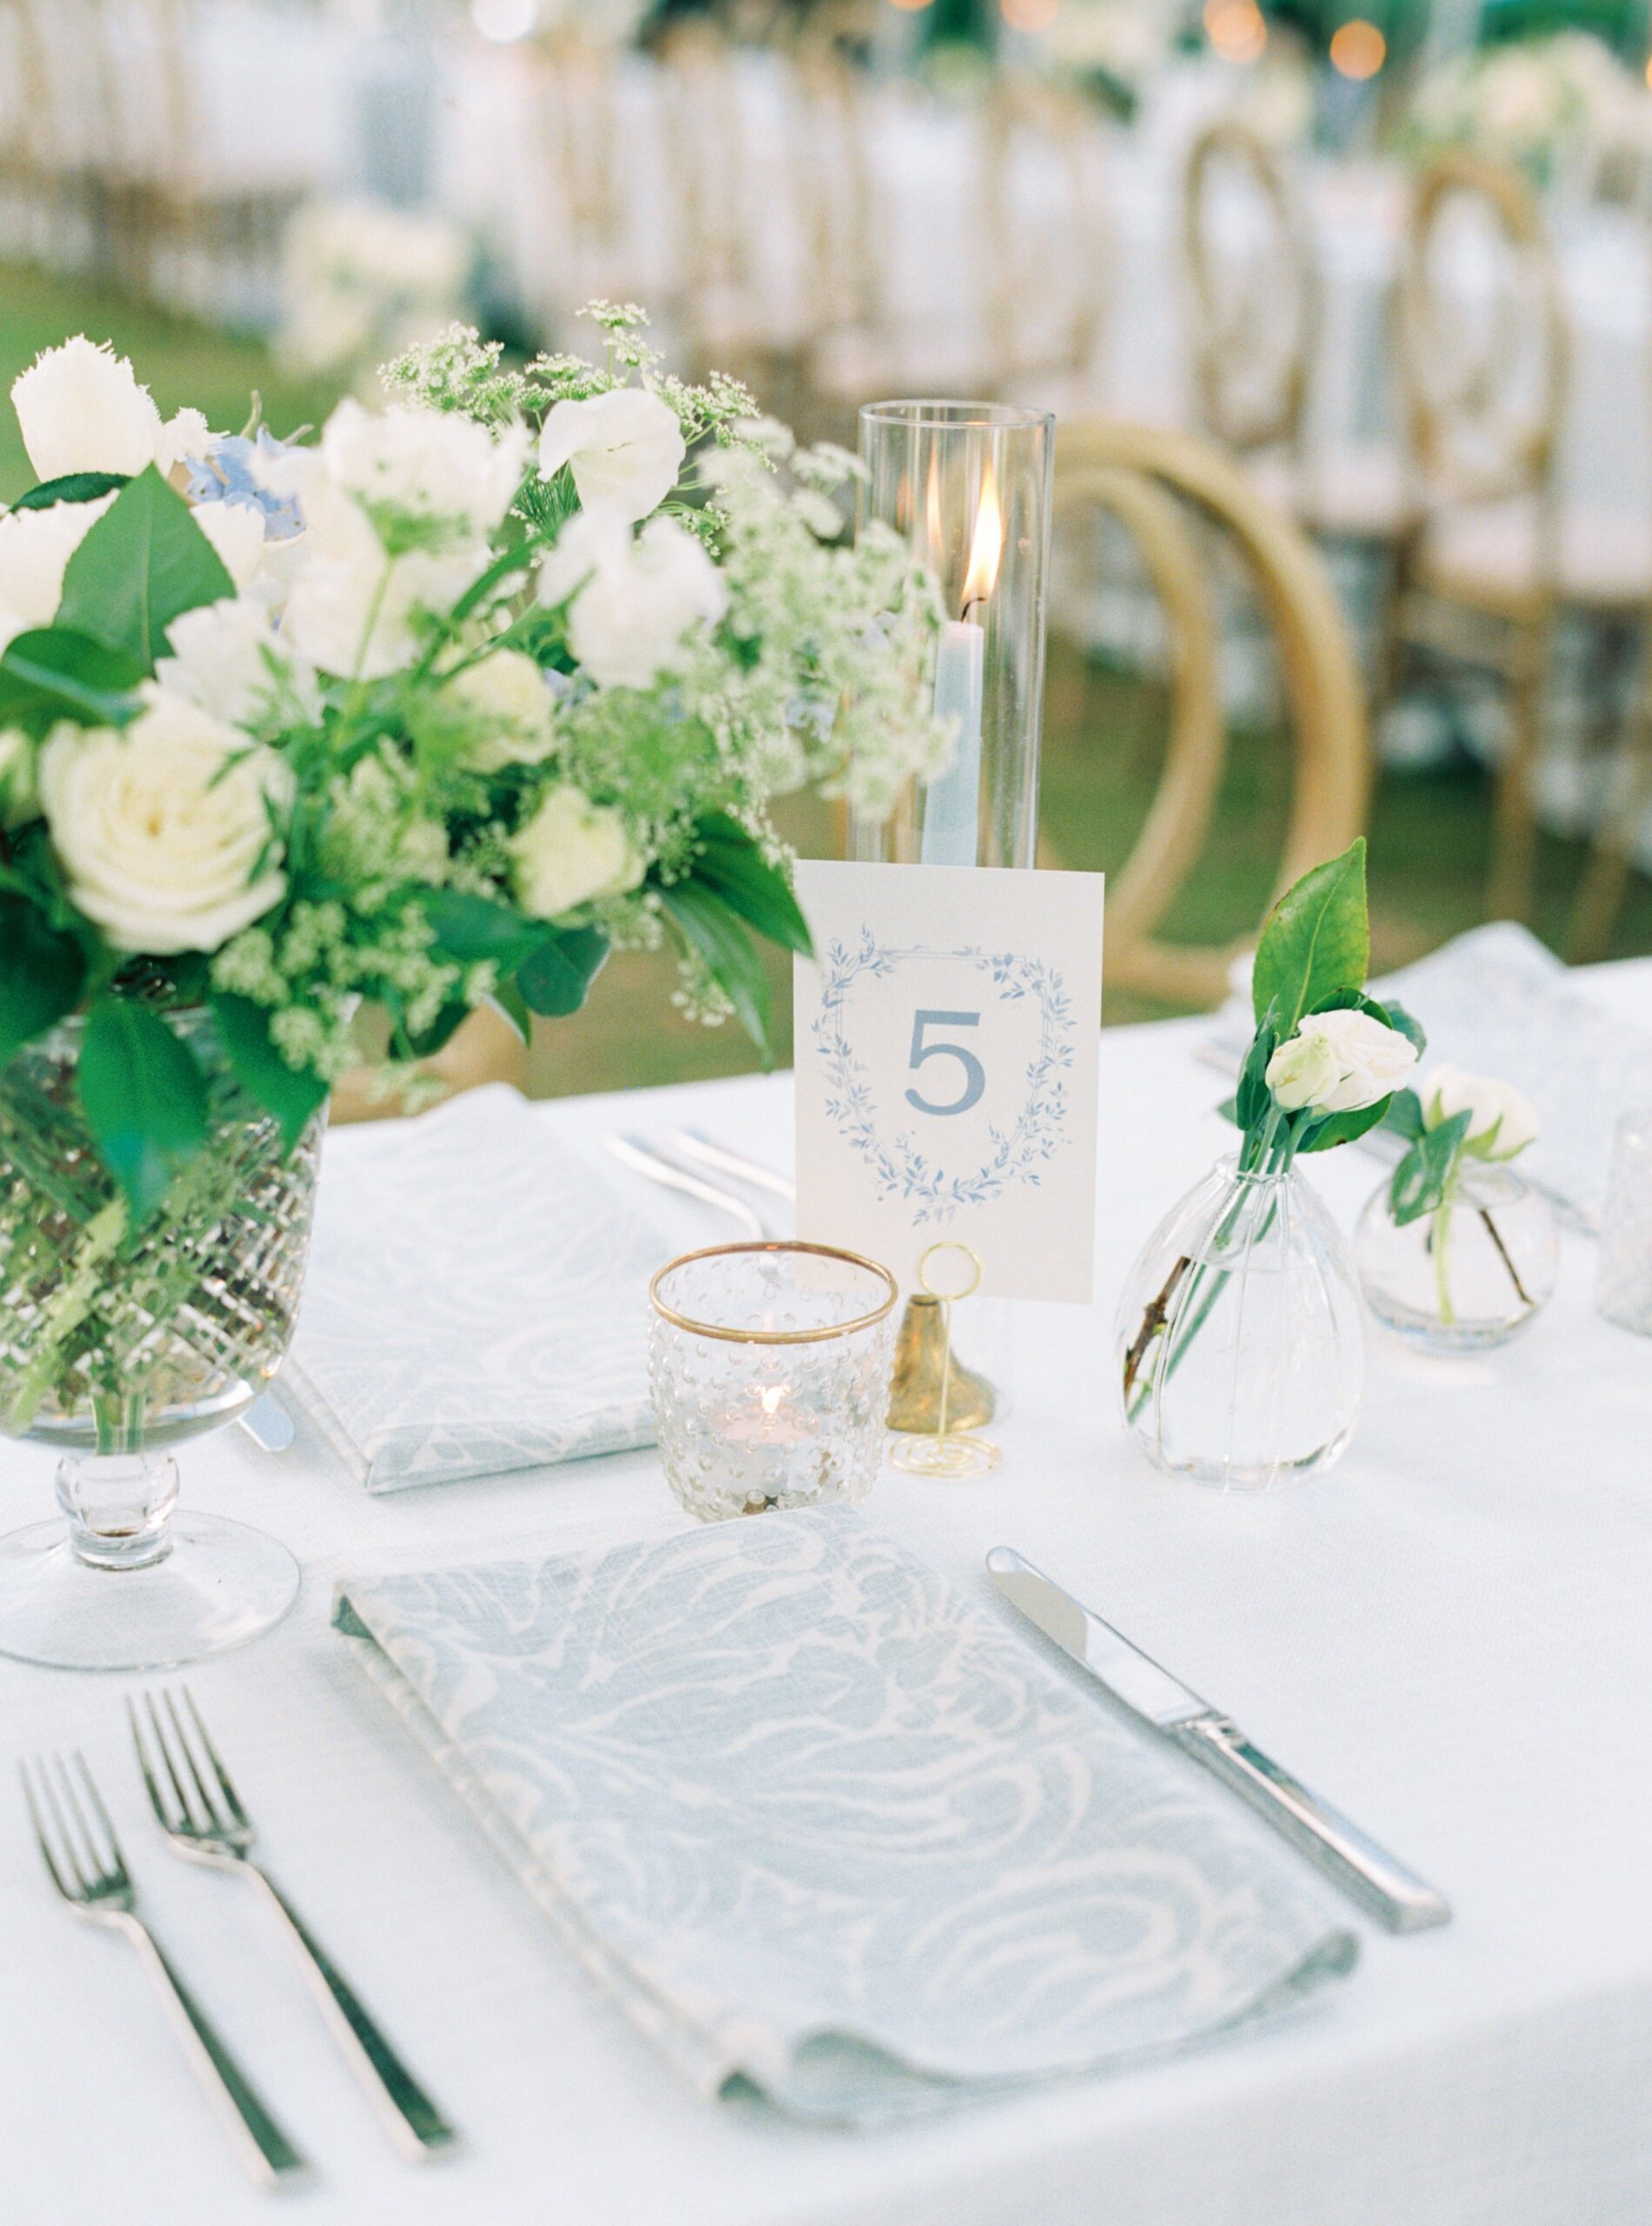 Light blue and white patterned napkins. Charleston spring wedding place setting. Custom table numbers.